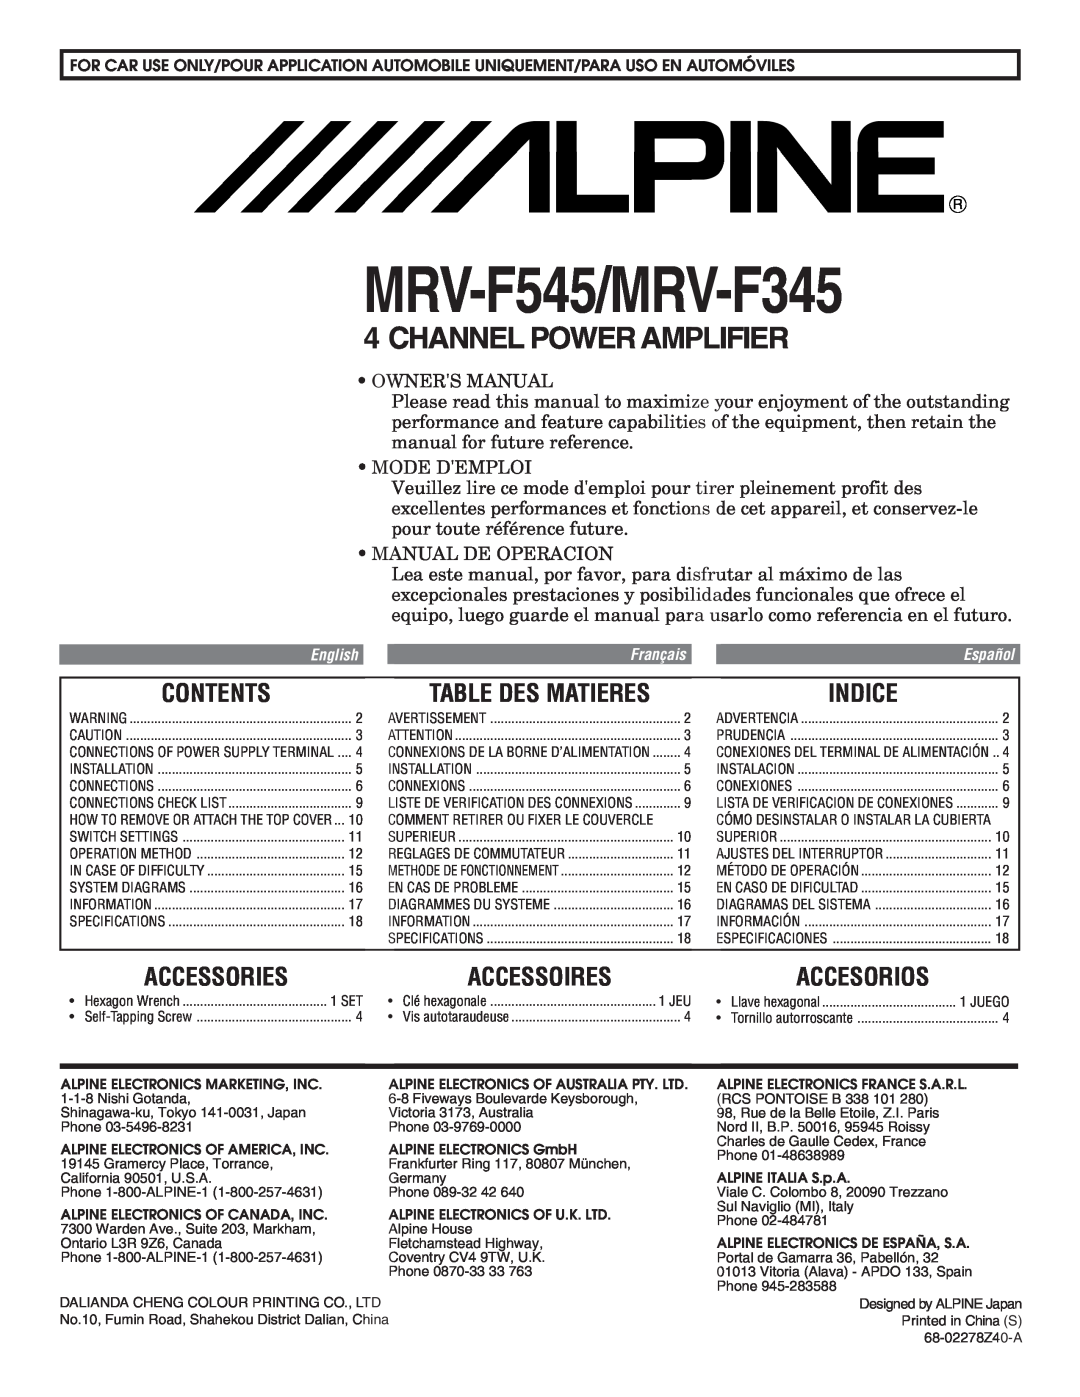 Alpine owner manual Contents, Indice, Accessories, Accessoires, Accesorios, Table Des Matieres, MRV-F545/MRV-F345 